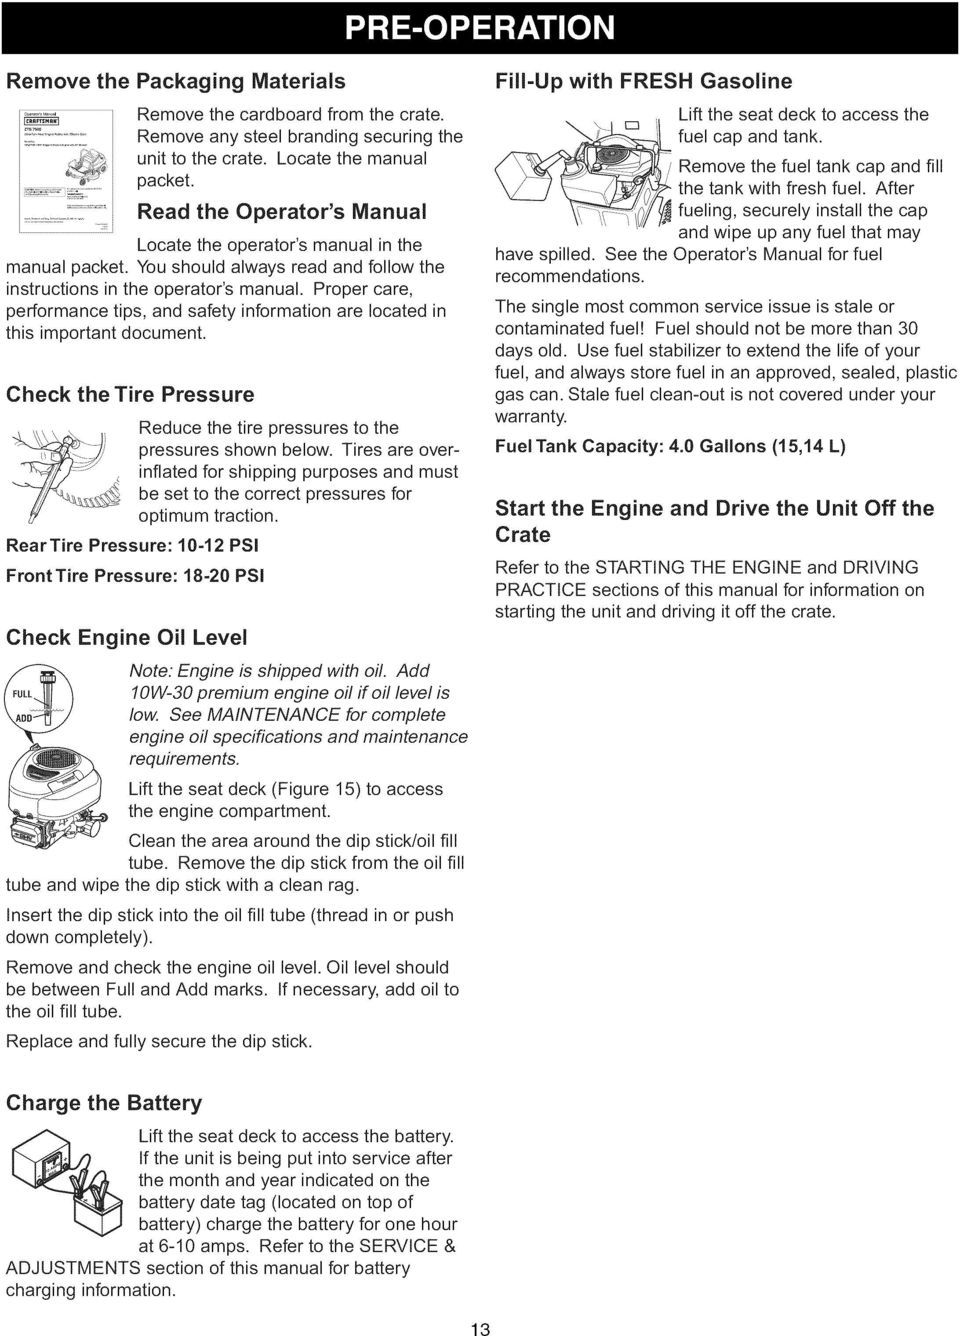 Proper care, performance tips, and safety information are located in this important document. Check the Tire Pressure the Reduce the tire pressures to the pressures shown below.